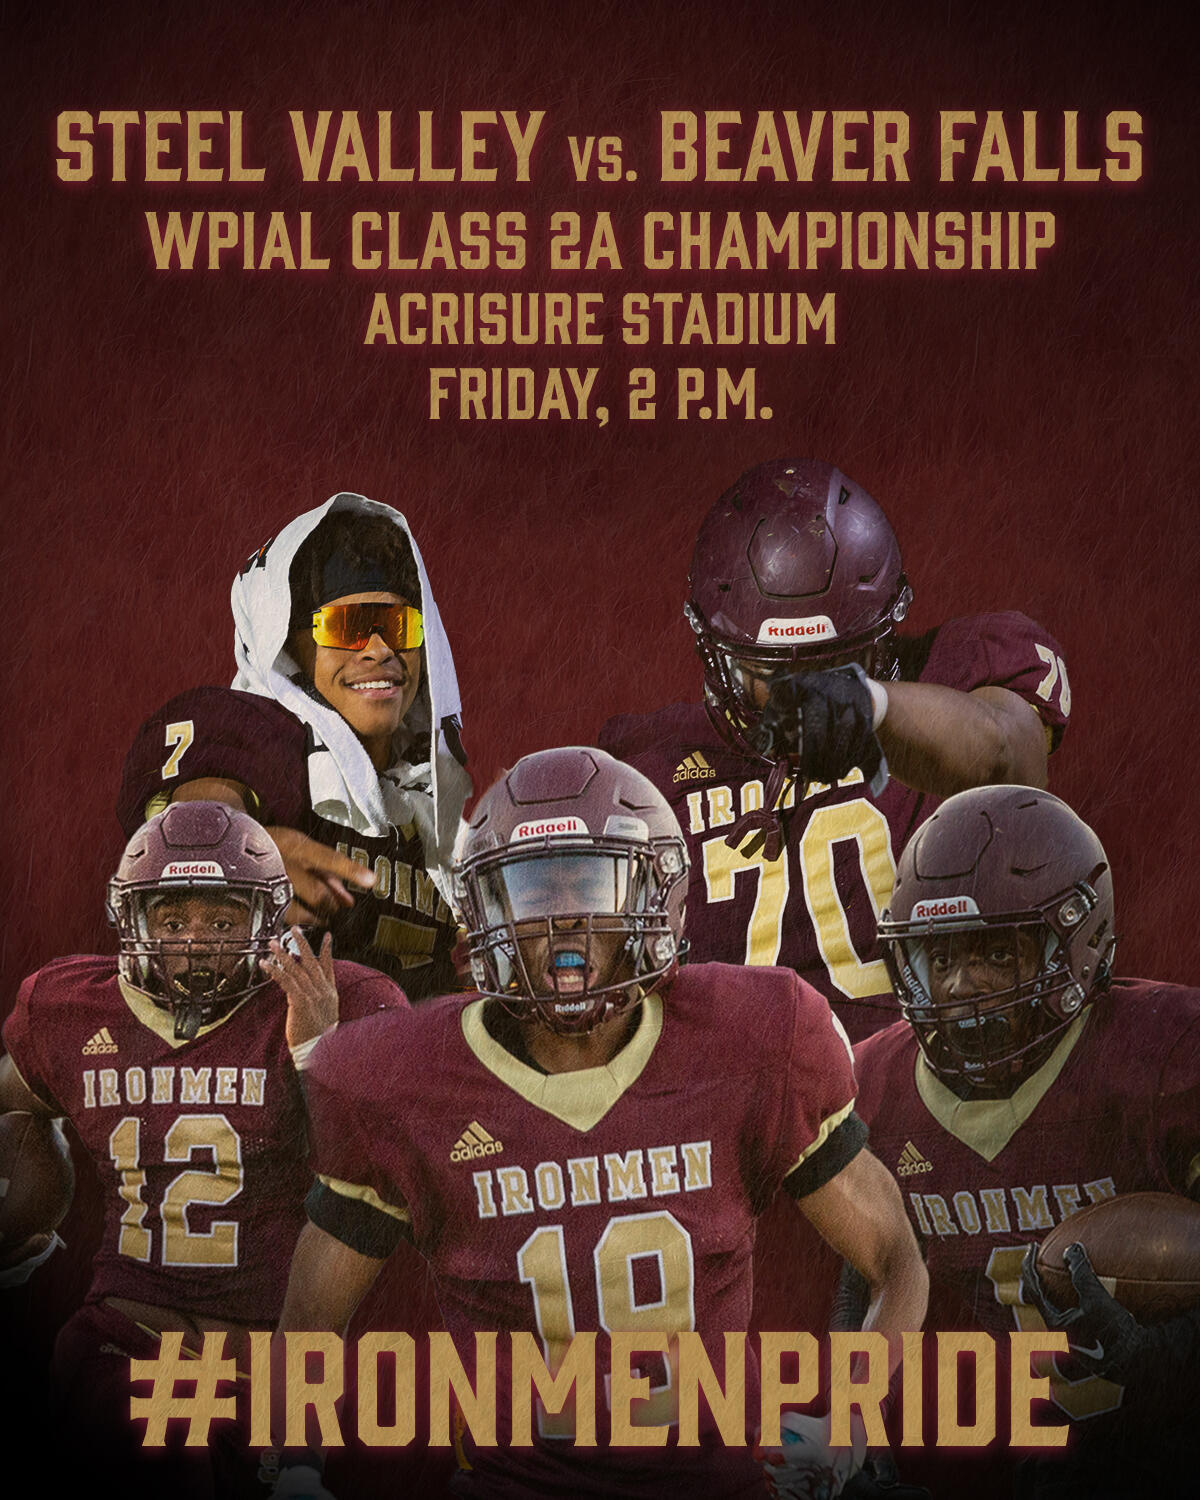 An illustrated image advertising the WPIAL Class 2A football championship between Steel Valley and Beaver Falls.